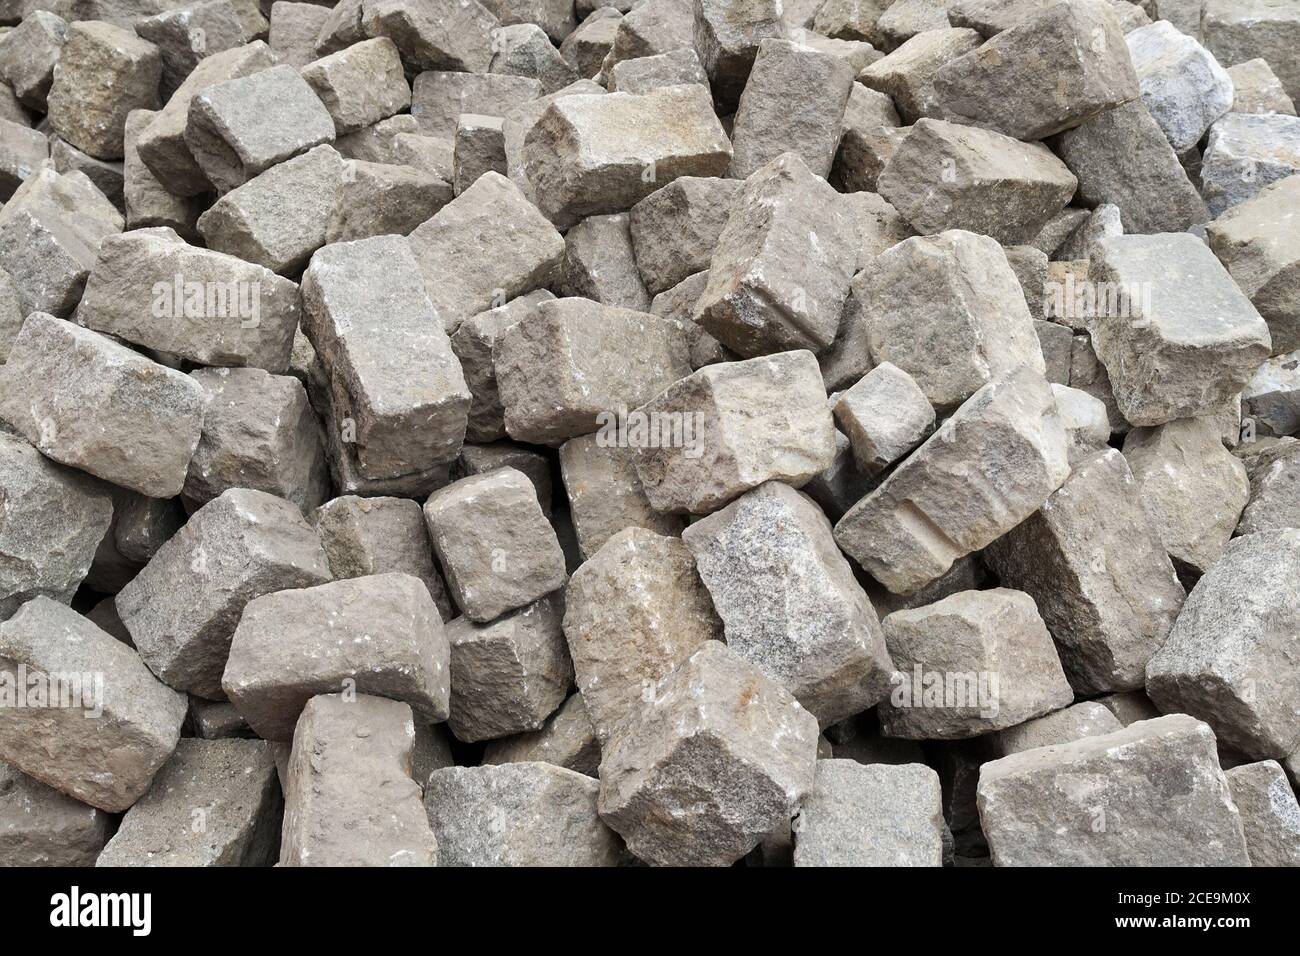 Heap of granite stones- Moscow, Russia Stock Photo